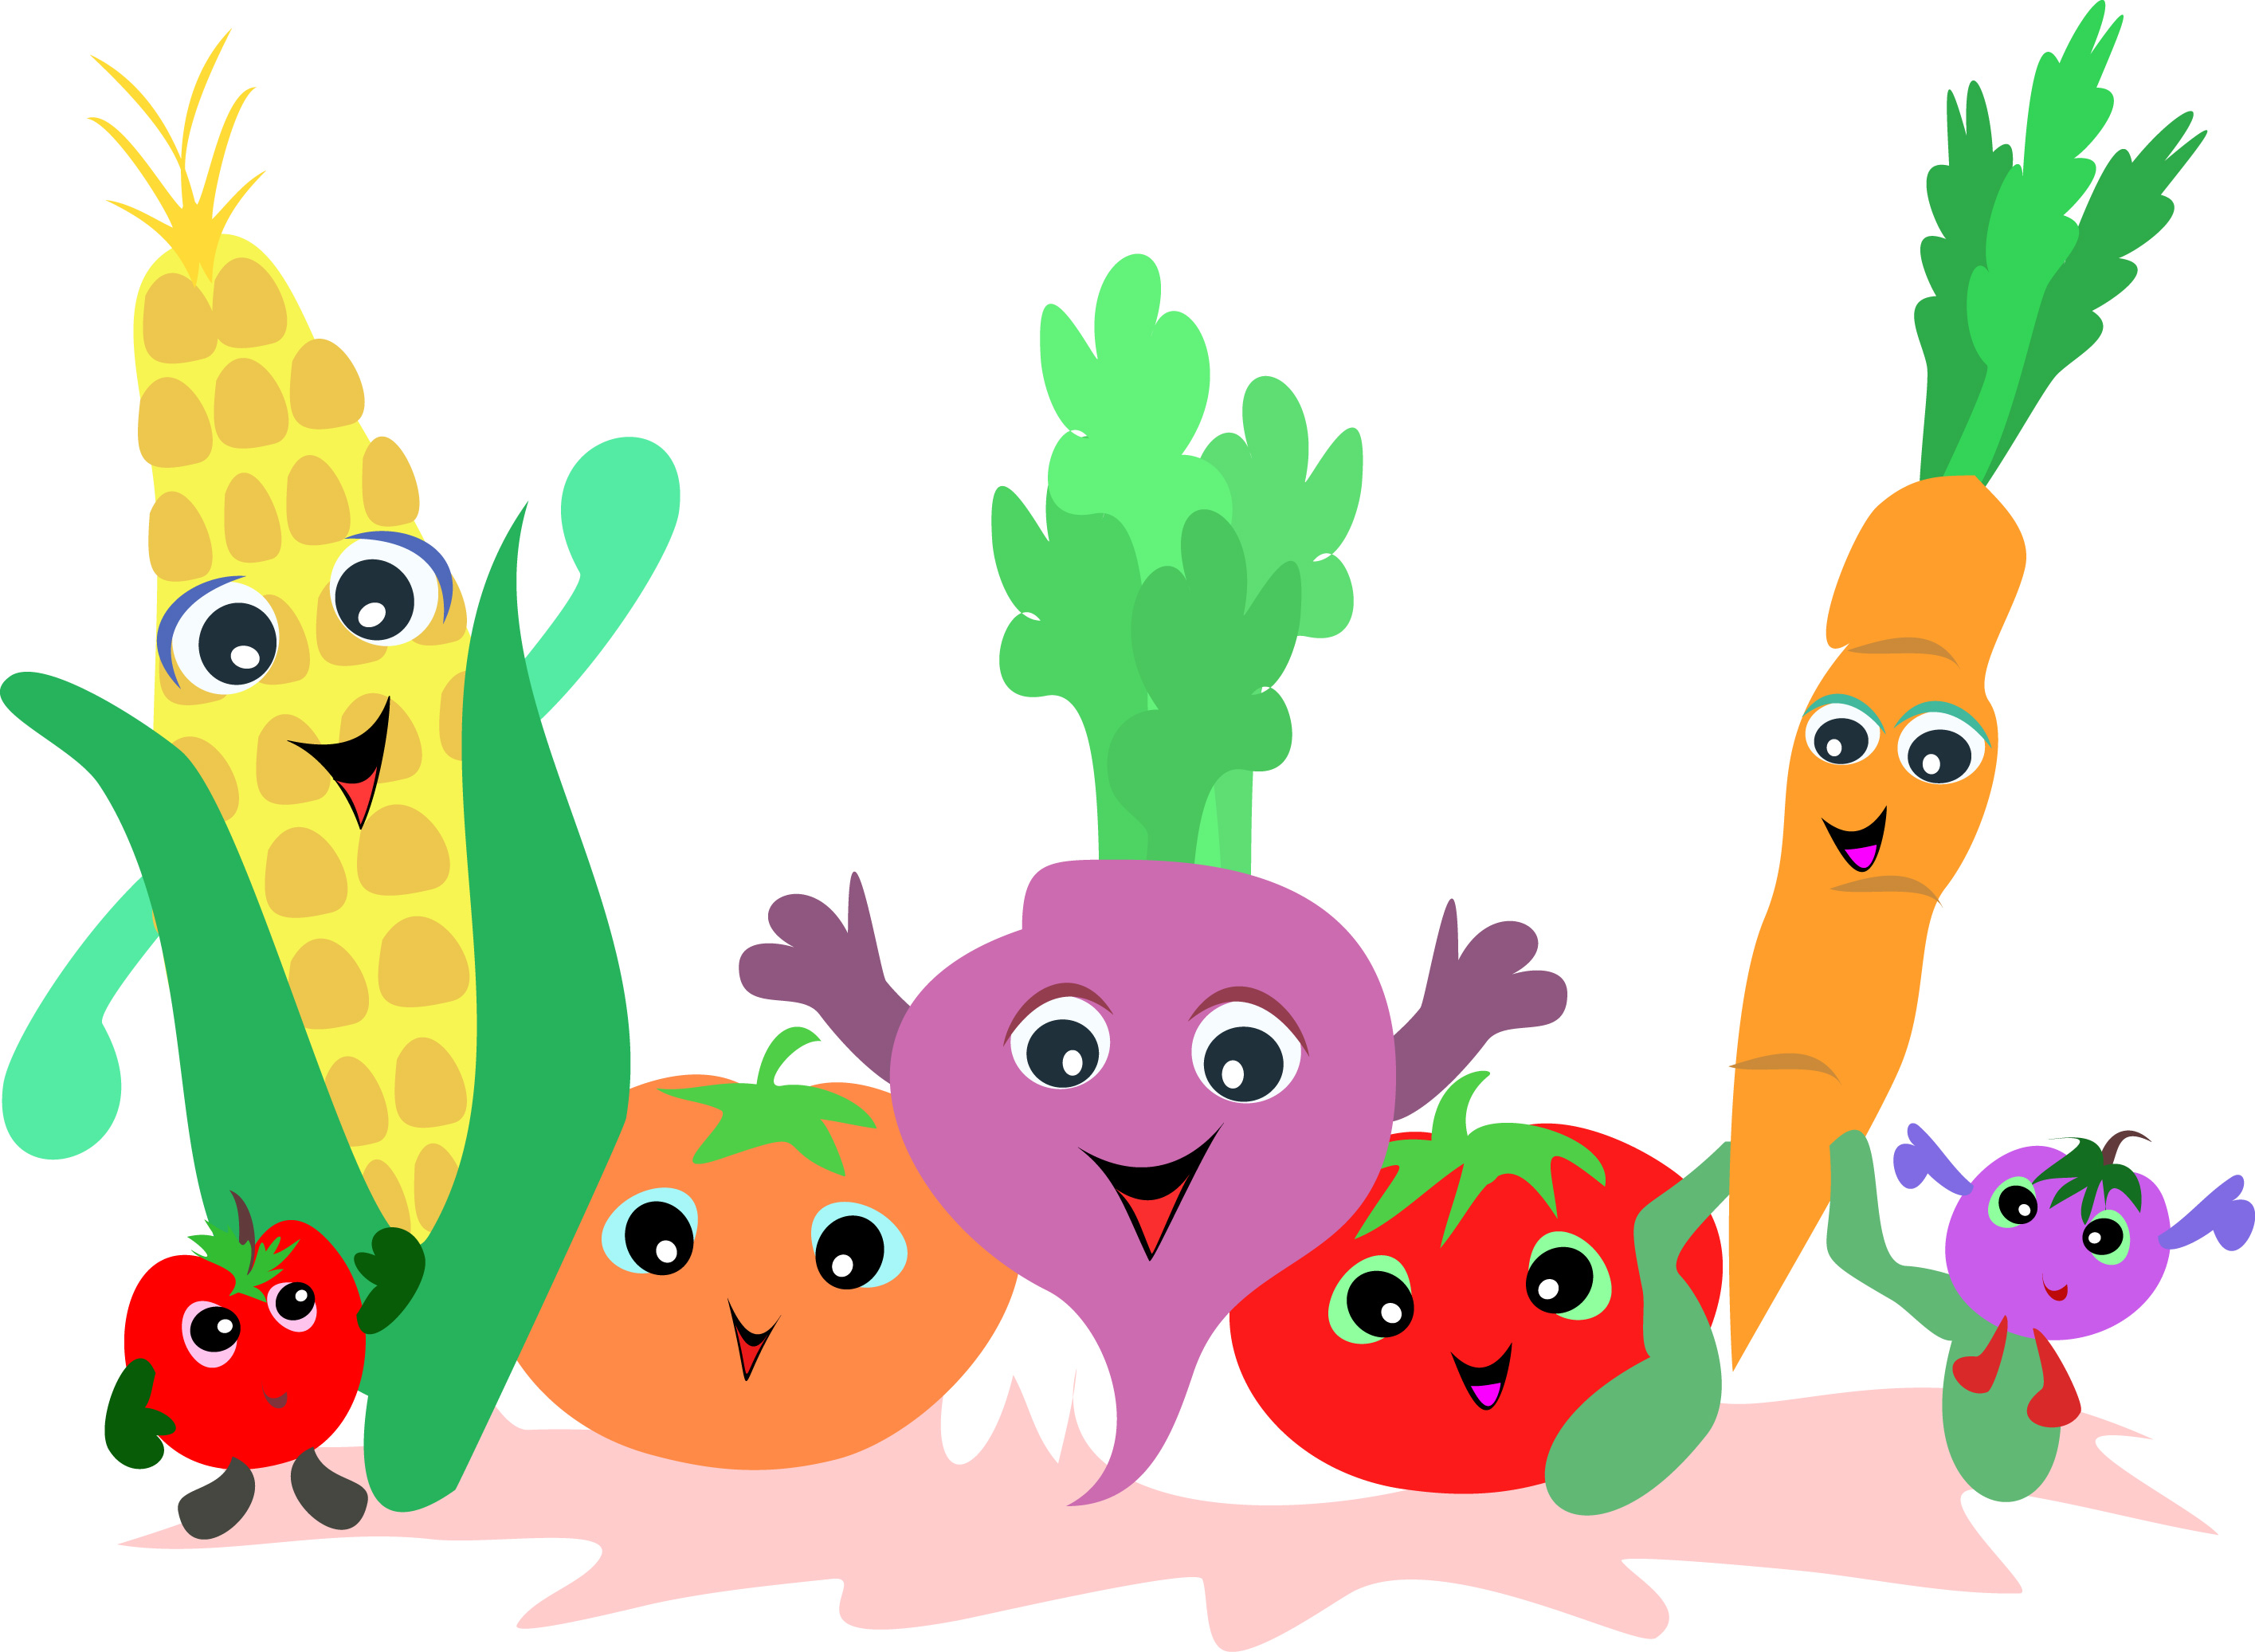 Fruits and vegetable clip art